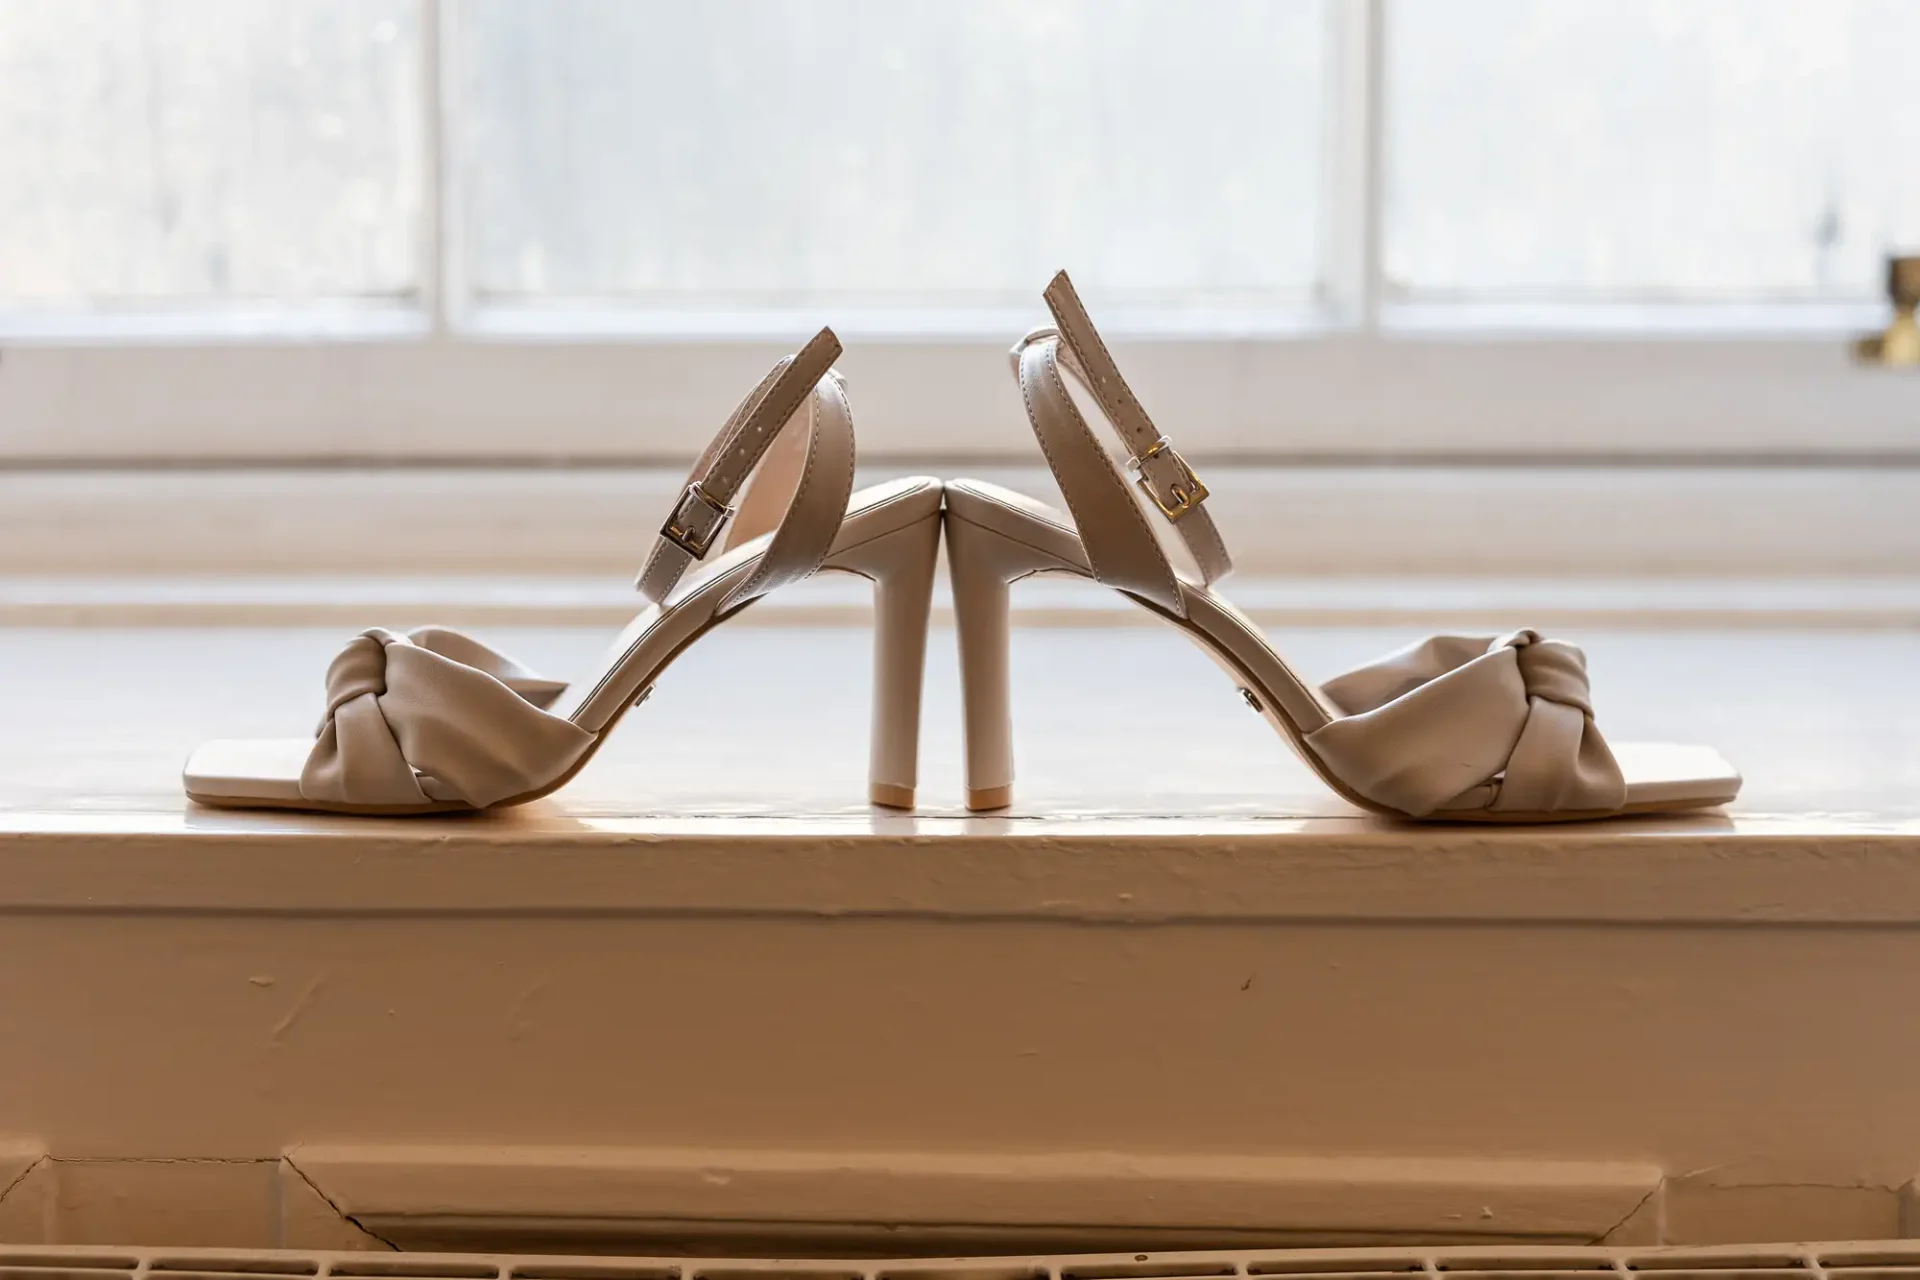 A pair of elegant beige high-heeled shoes displayed on a windowsill against a softly lit background.